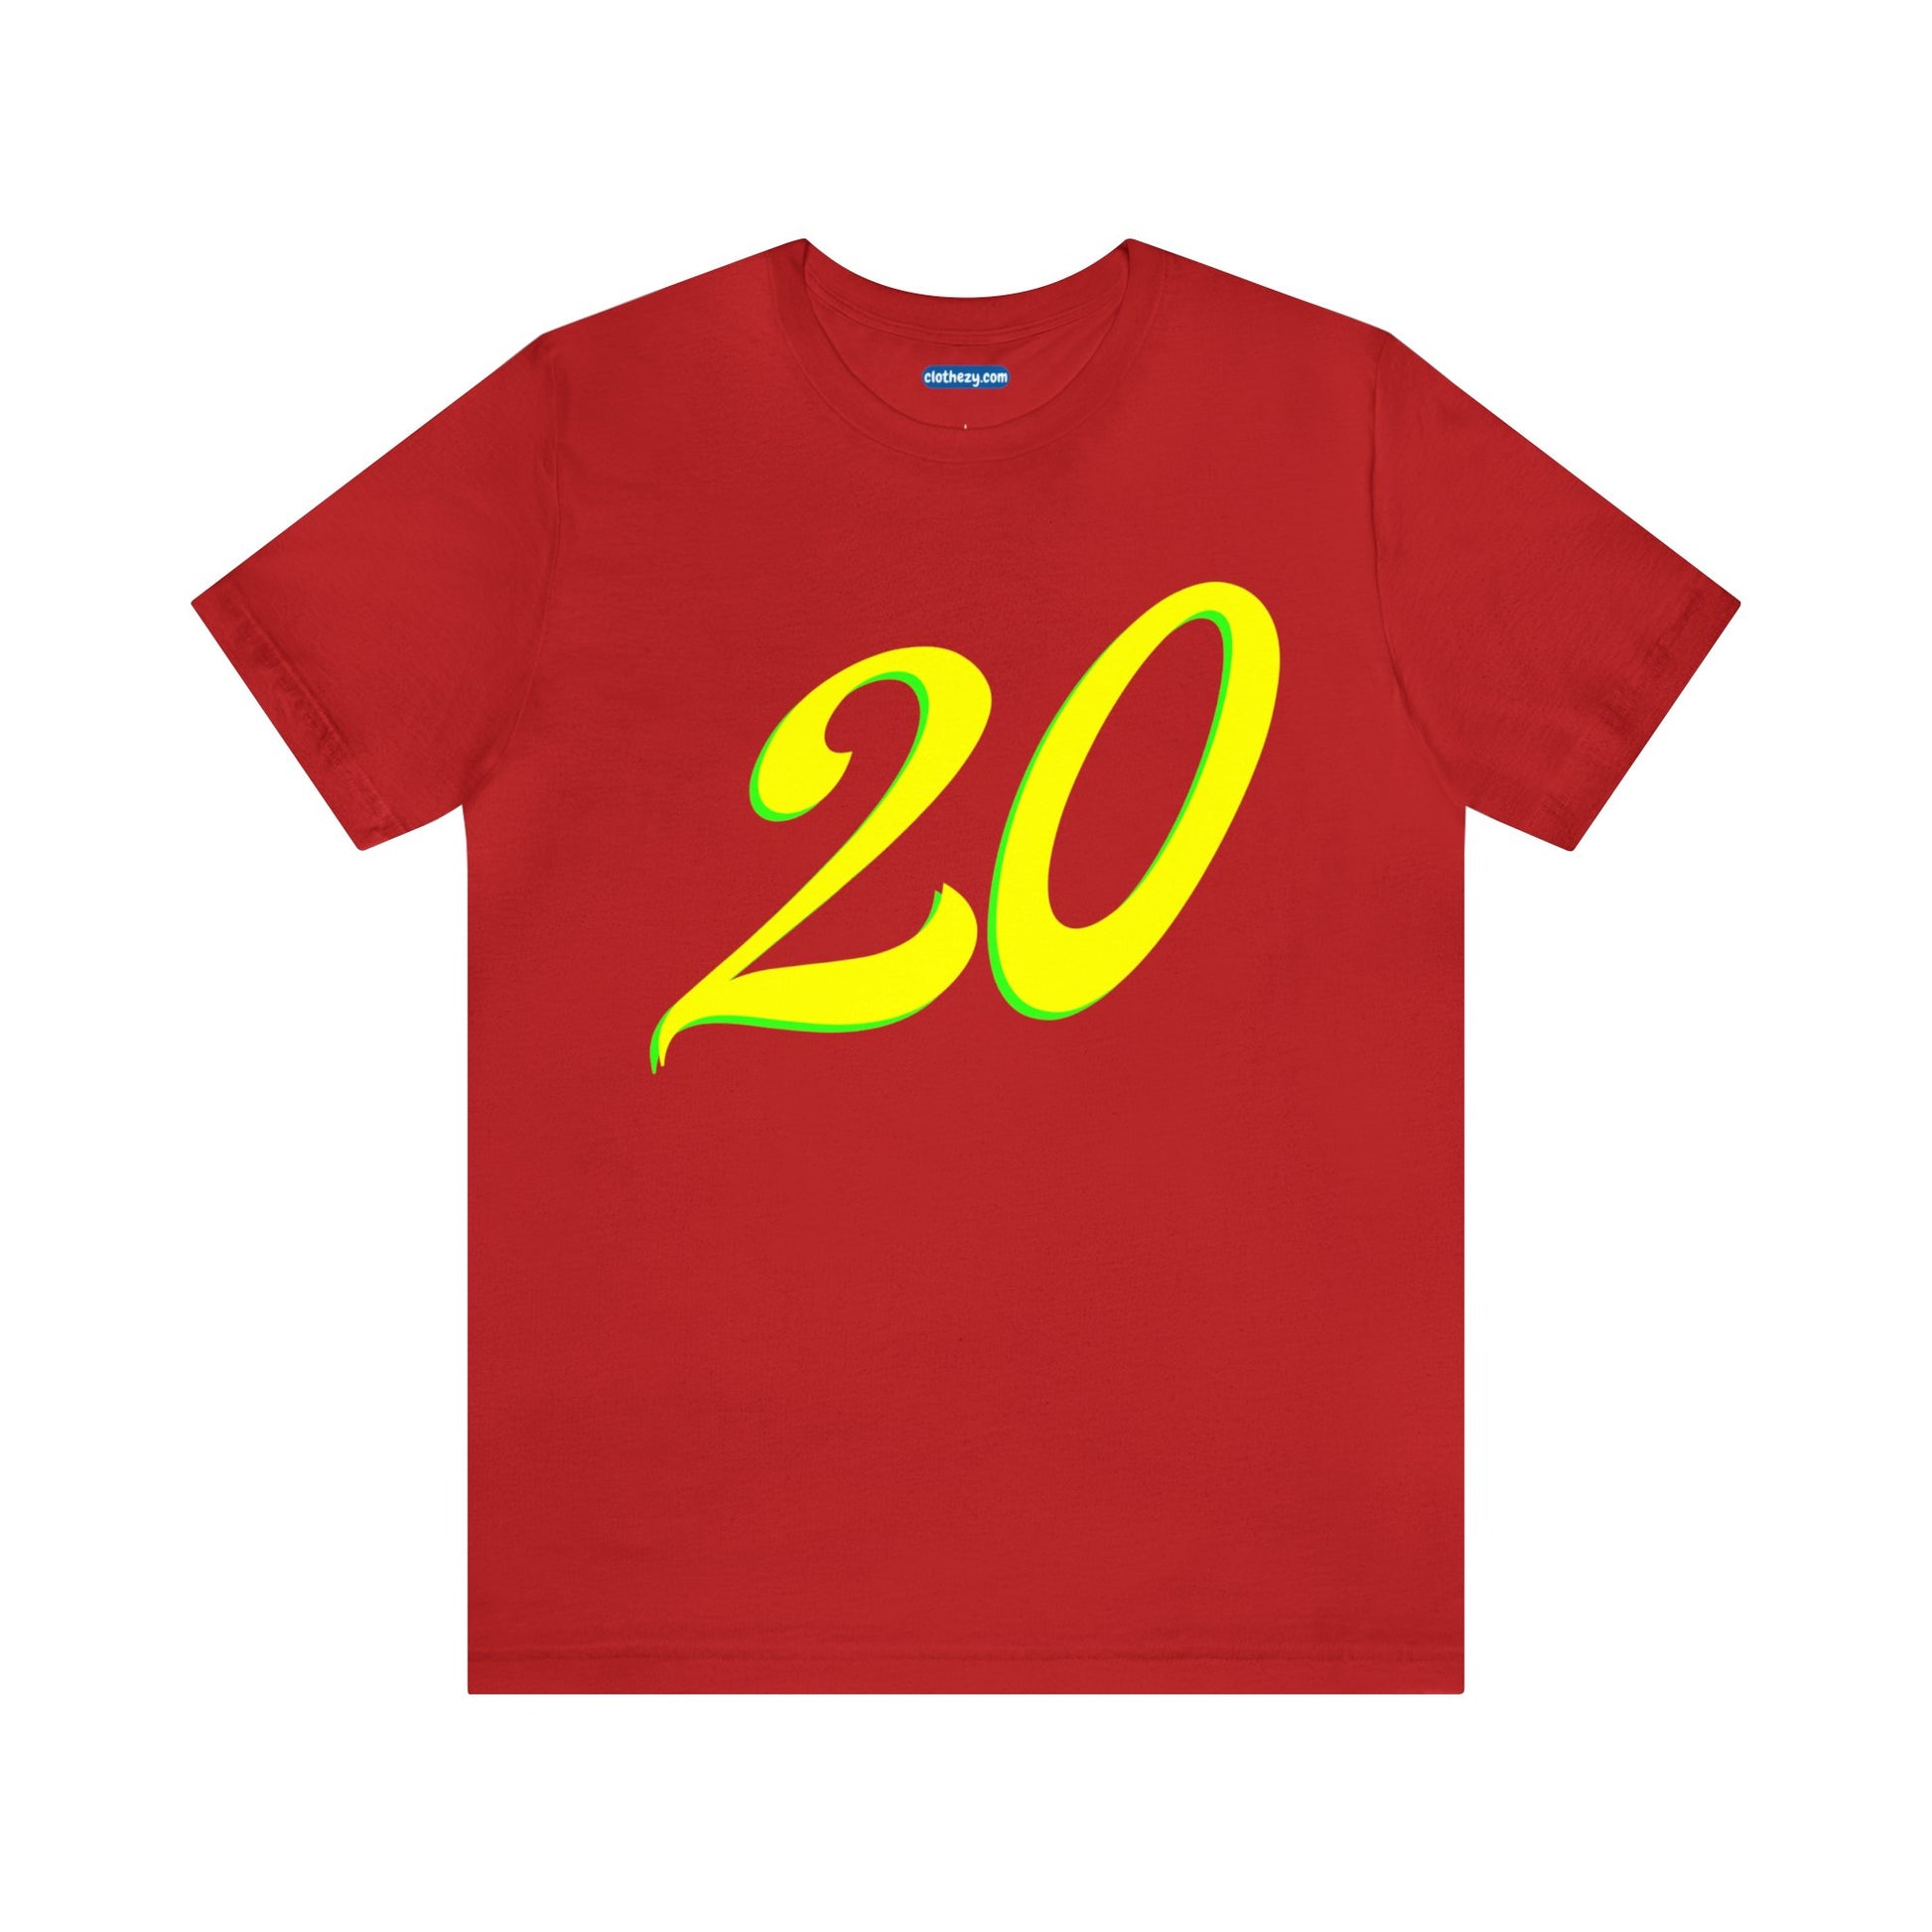 Number 20 Design - Soft Cotton Tee for birthdays and celebrations, Gift for friends and family, Multiple Options by clothezy.com in Red Size Small - Buy Now